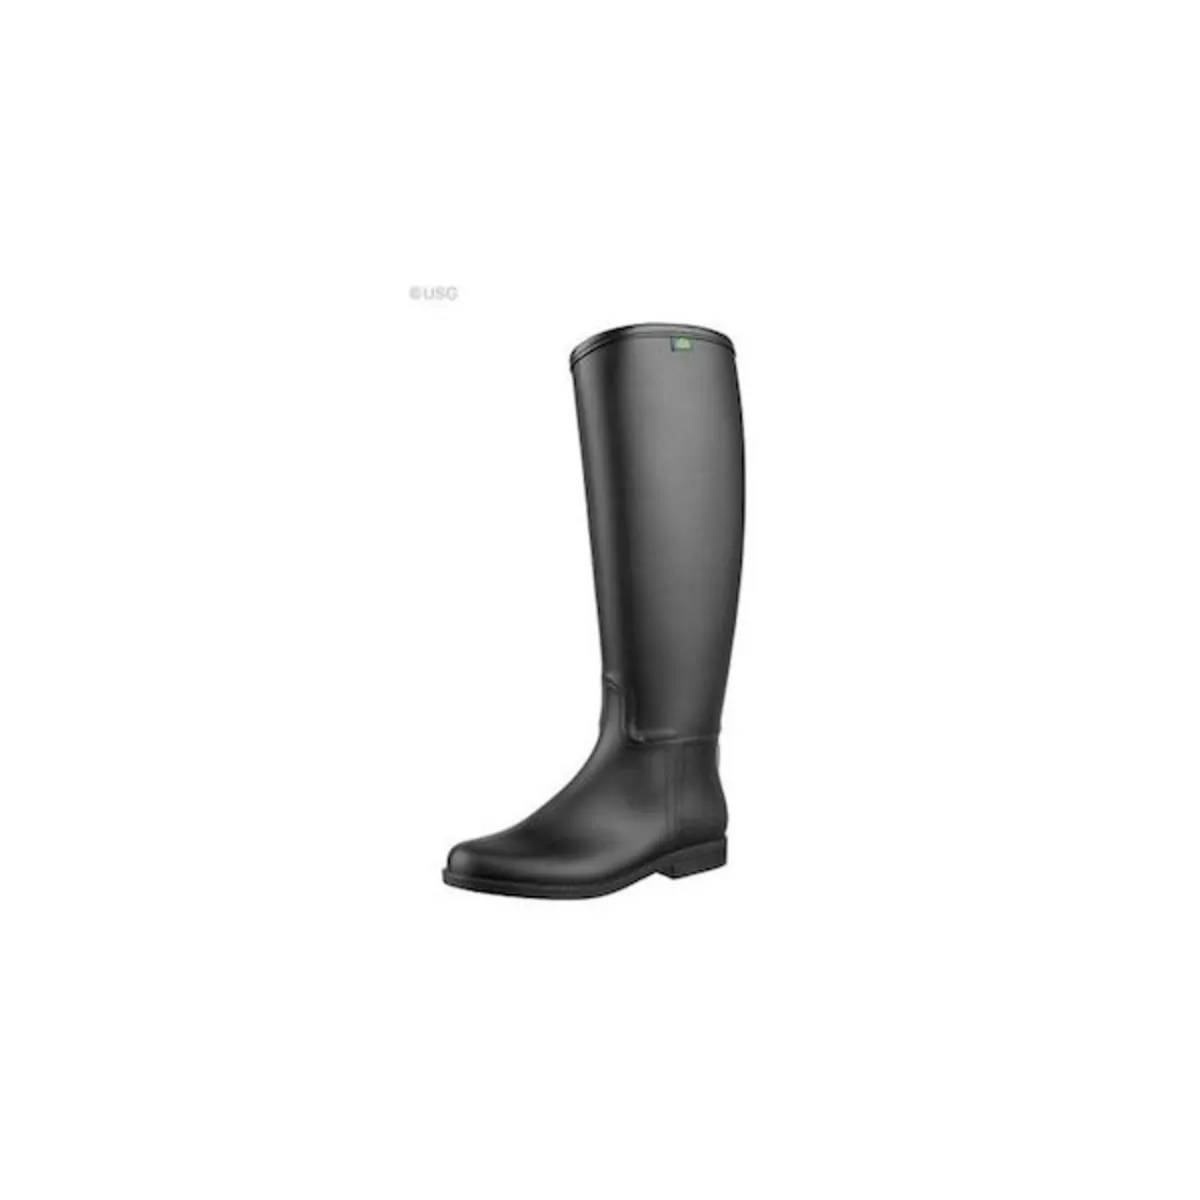 Rubber Riding Boots- nationwide Delivery - Image 1